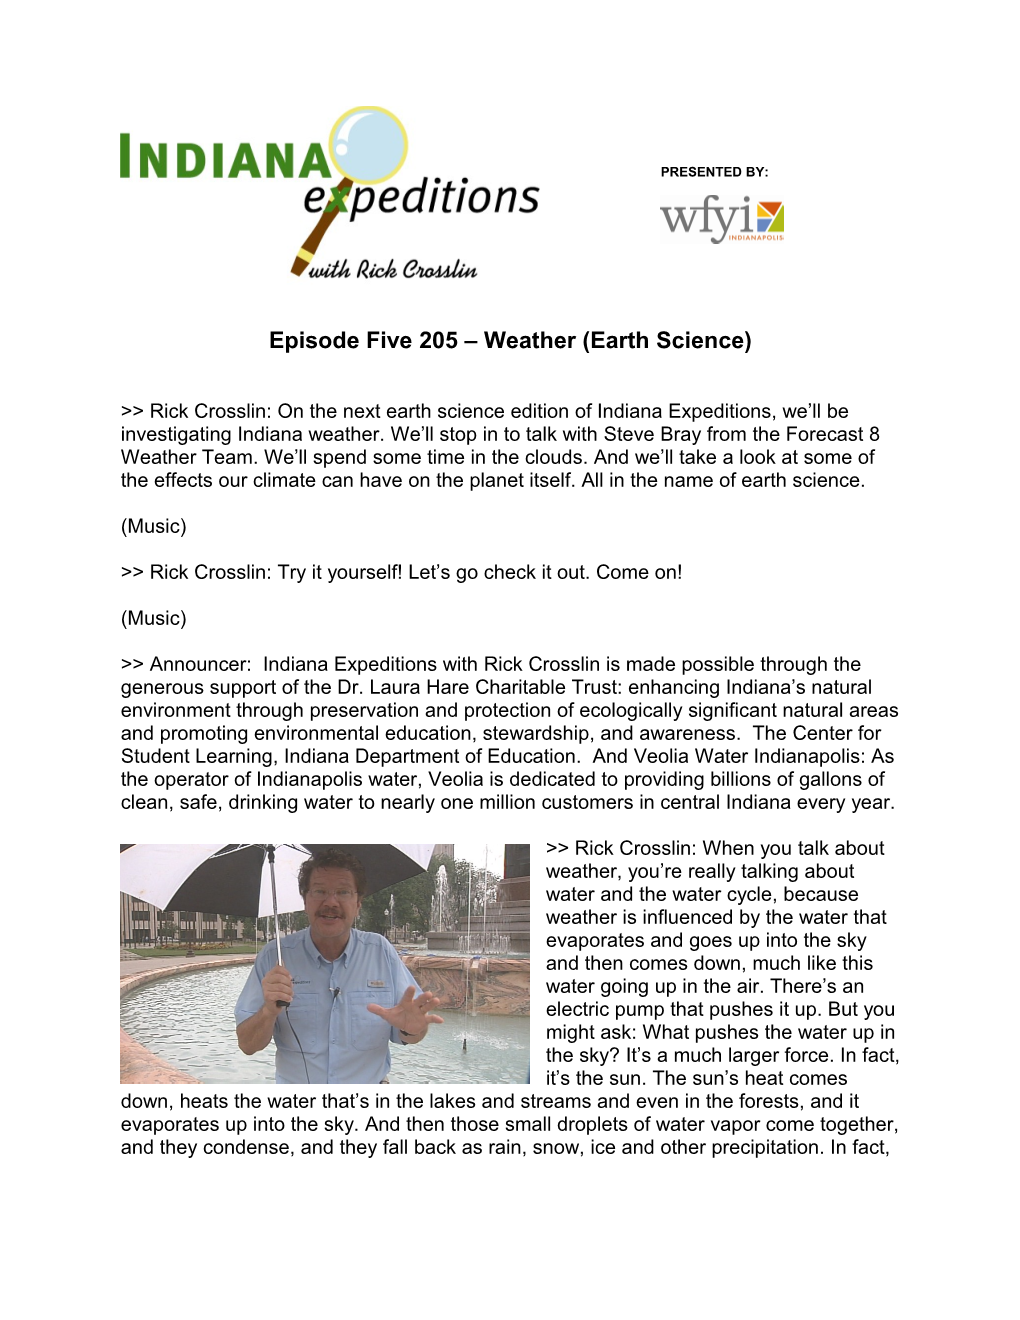 Rick Crosslin: on the Next Earth Science Edition of Indiana Expeditions, We Ll Be Investigating